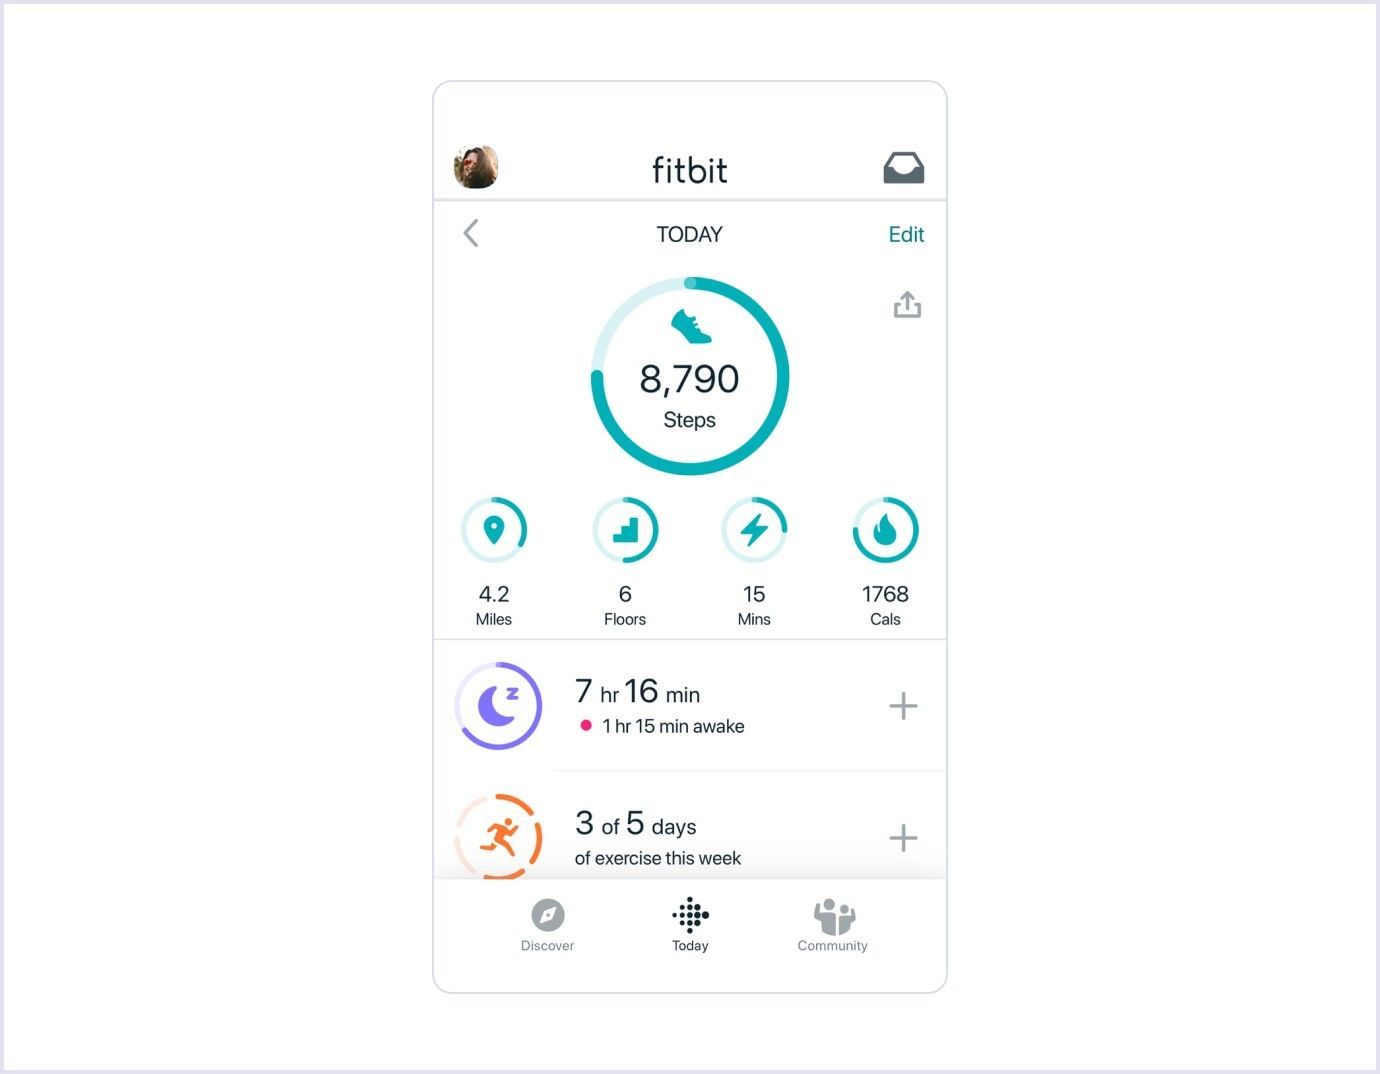 FitBit activity tracking app